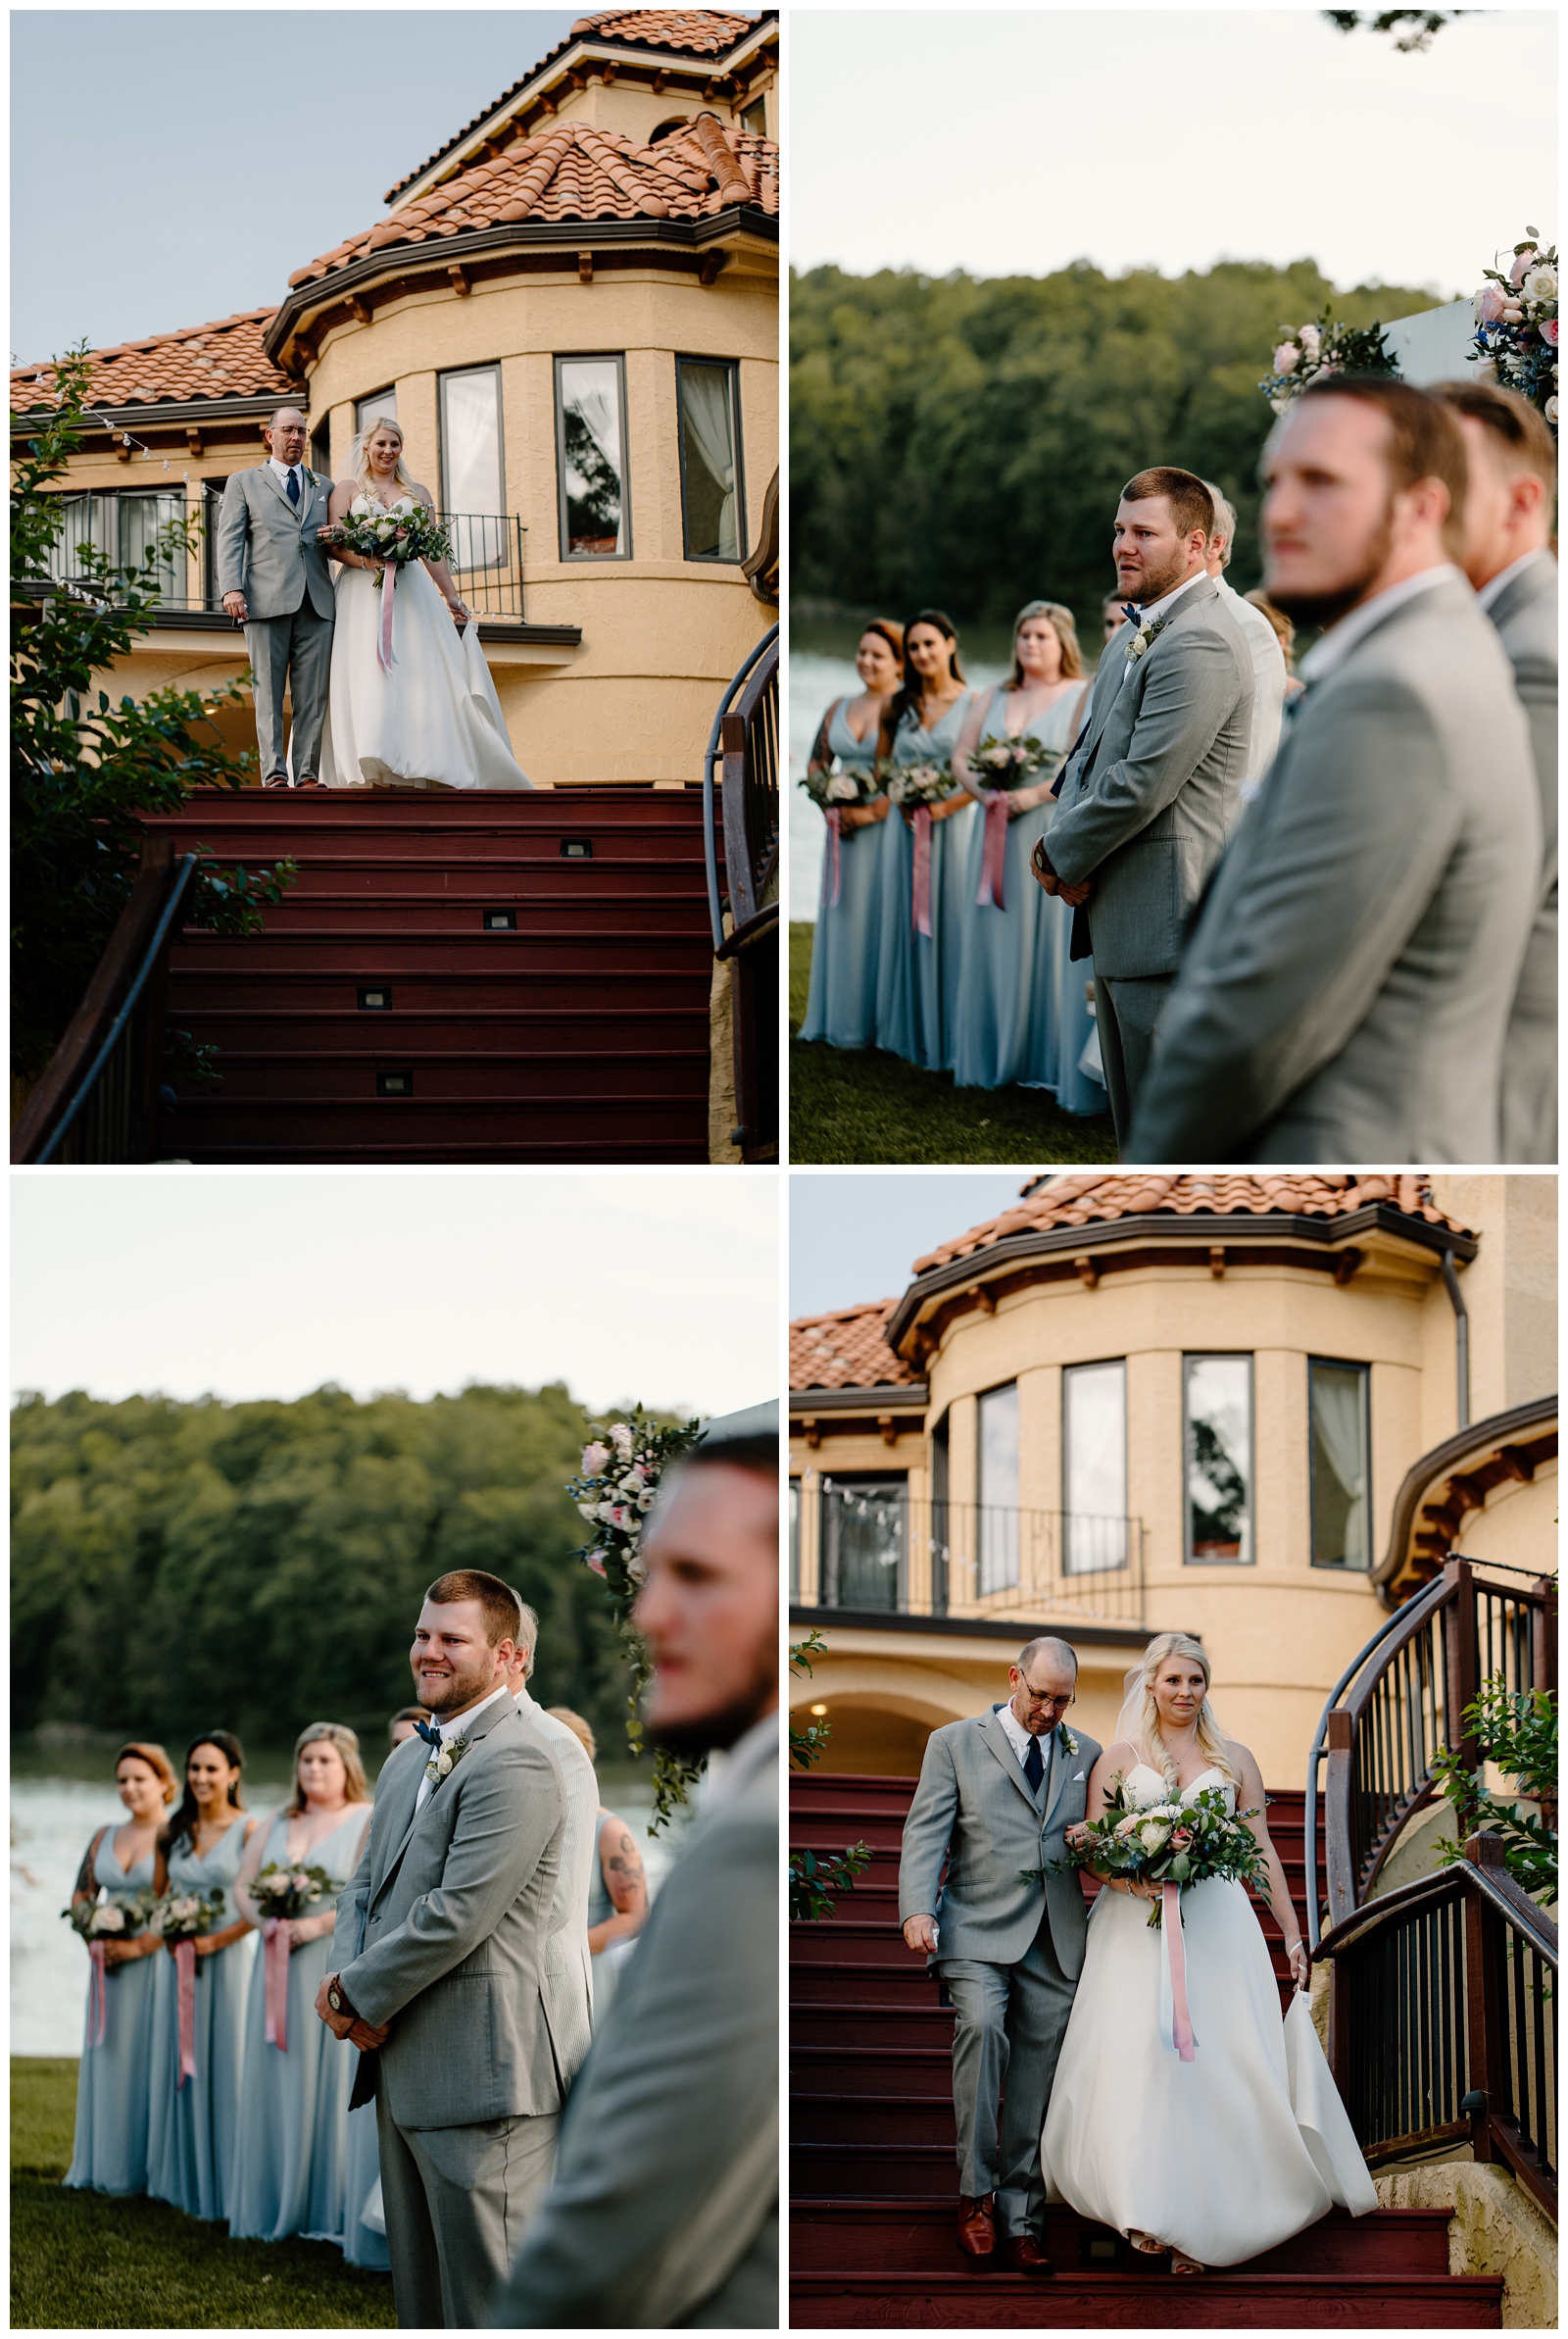 Bride walking down aisle and the groom's face at their southern lakeside wedding in North Carolina - by NC photographer